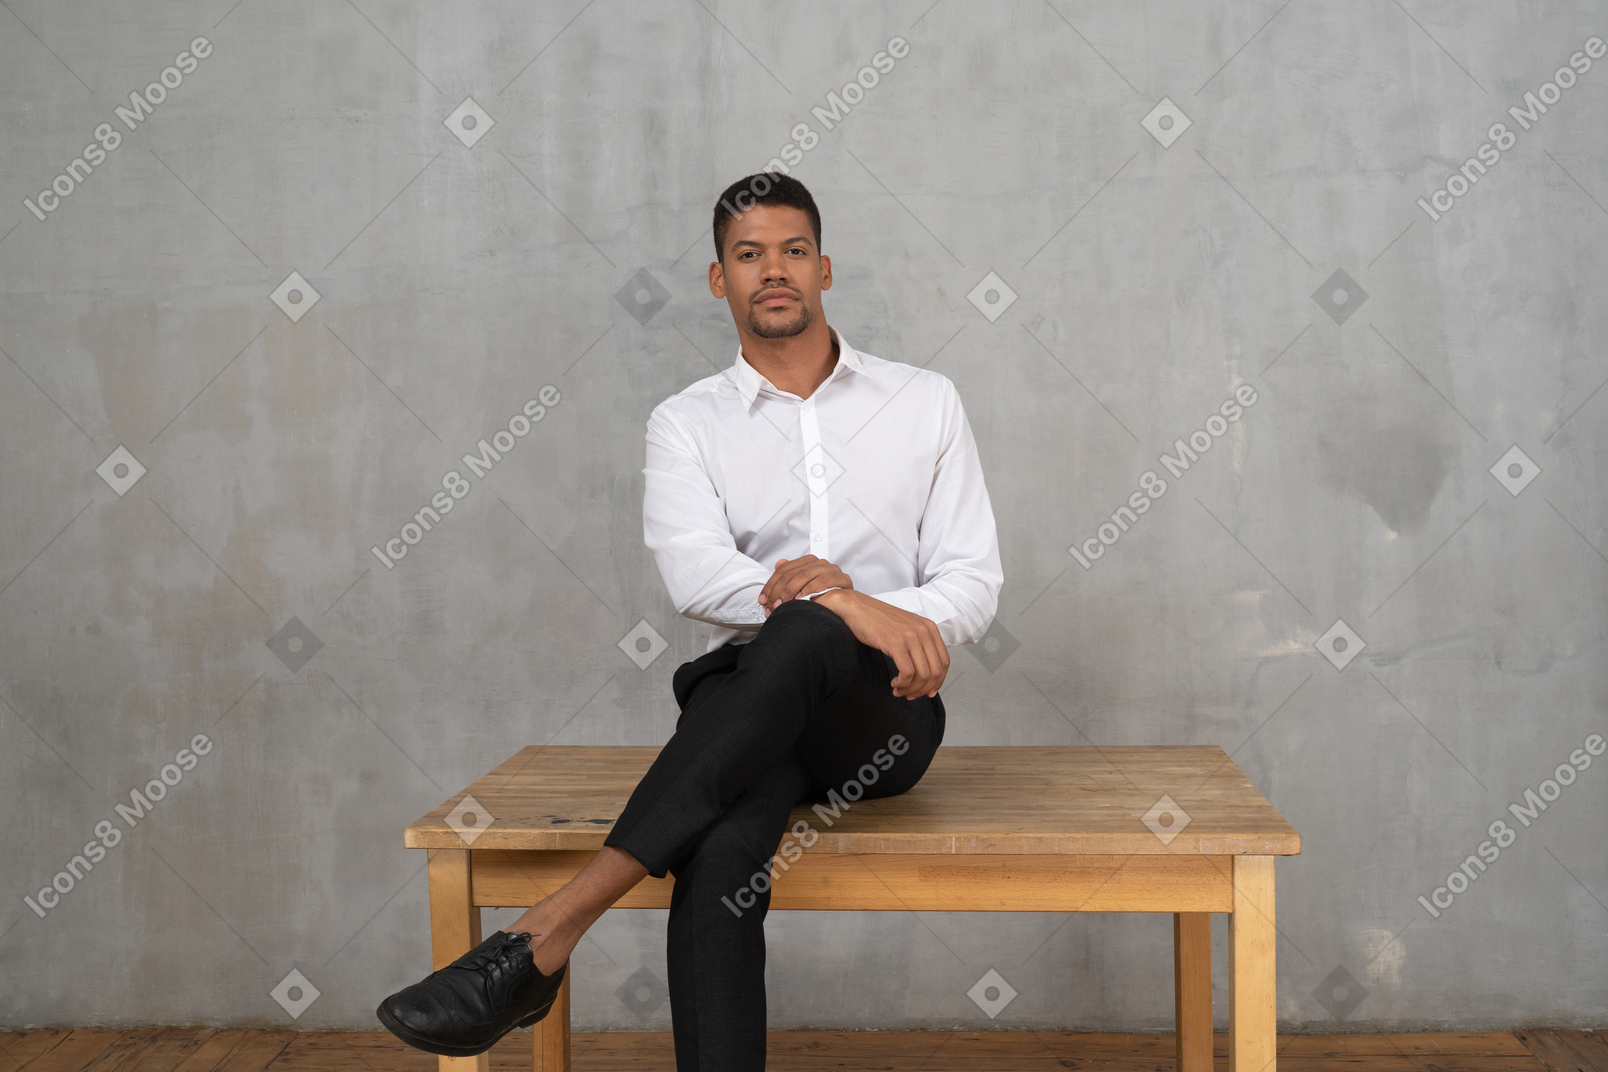 Confident man in formal clothes sitting cross legged on a table